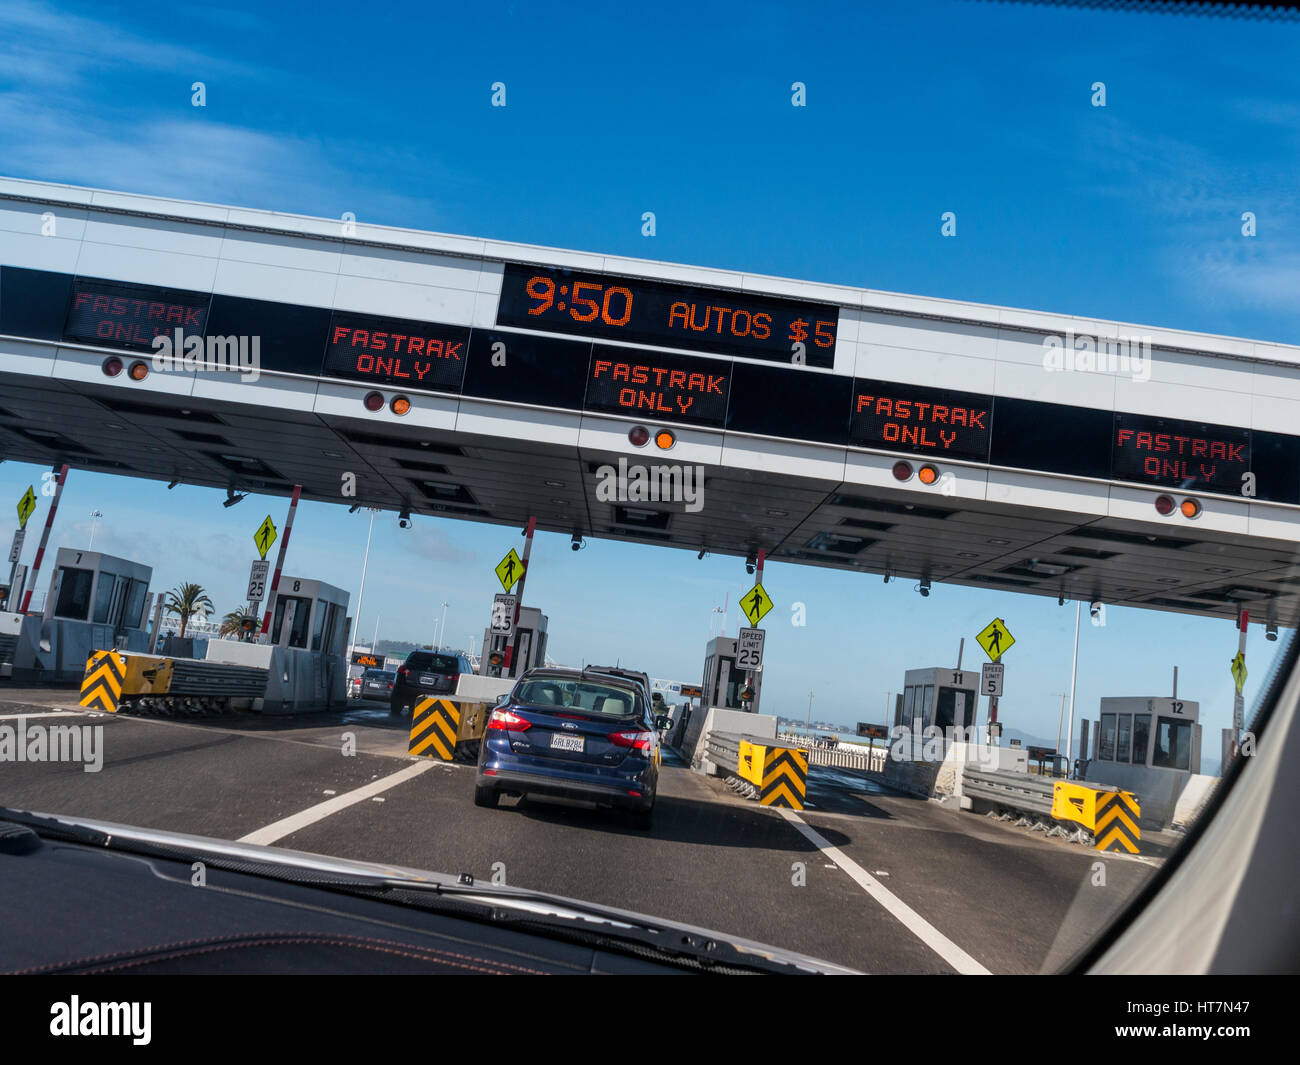 Car POV of Toll Booths and Fastrak signs on gantry over Interstate 80 highway to San Francisco City California USA Stock Photo